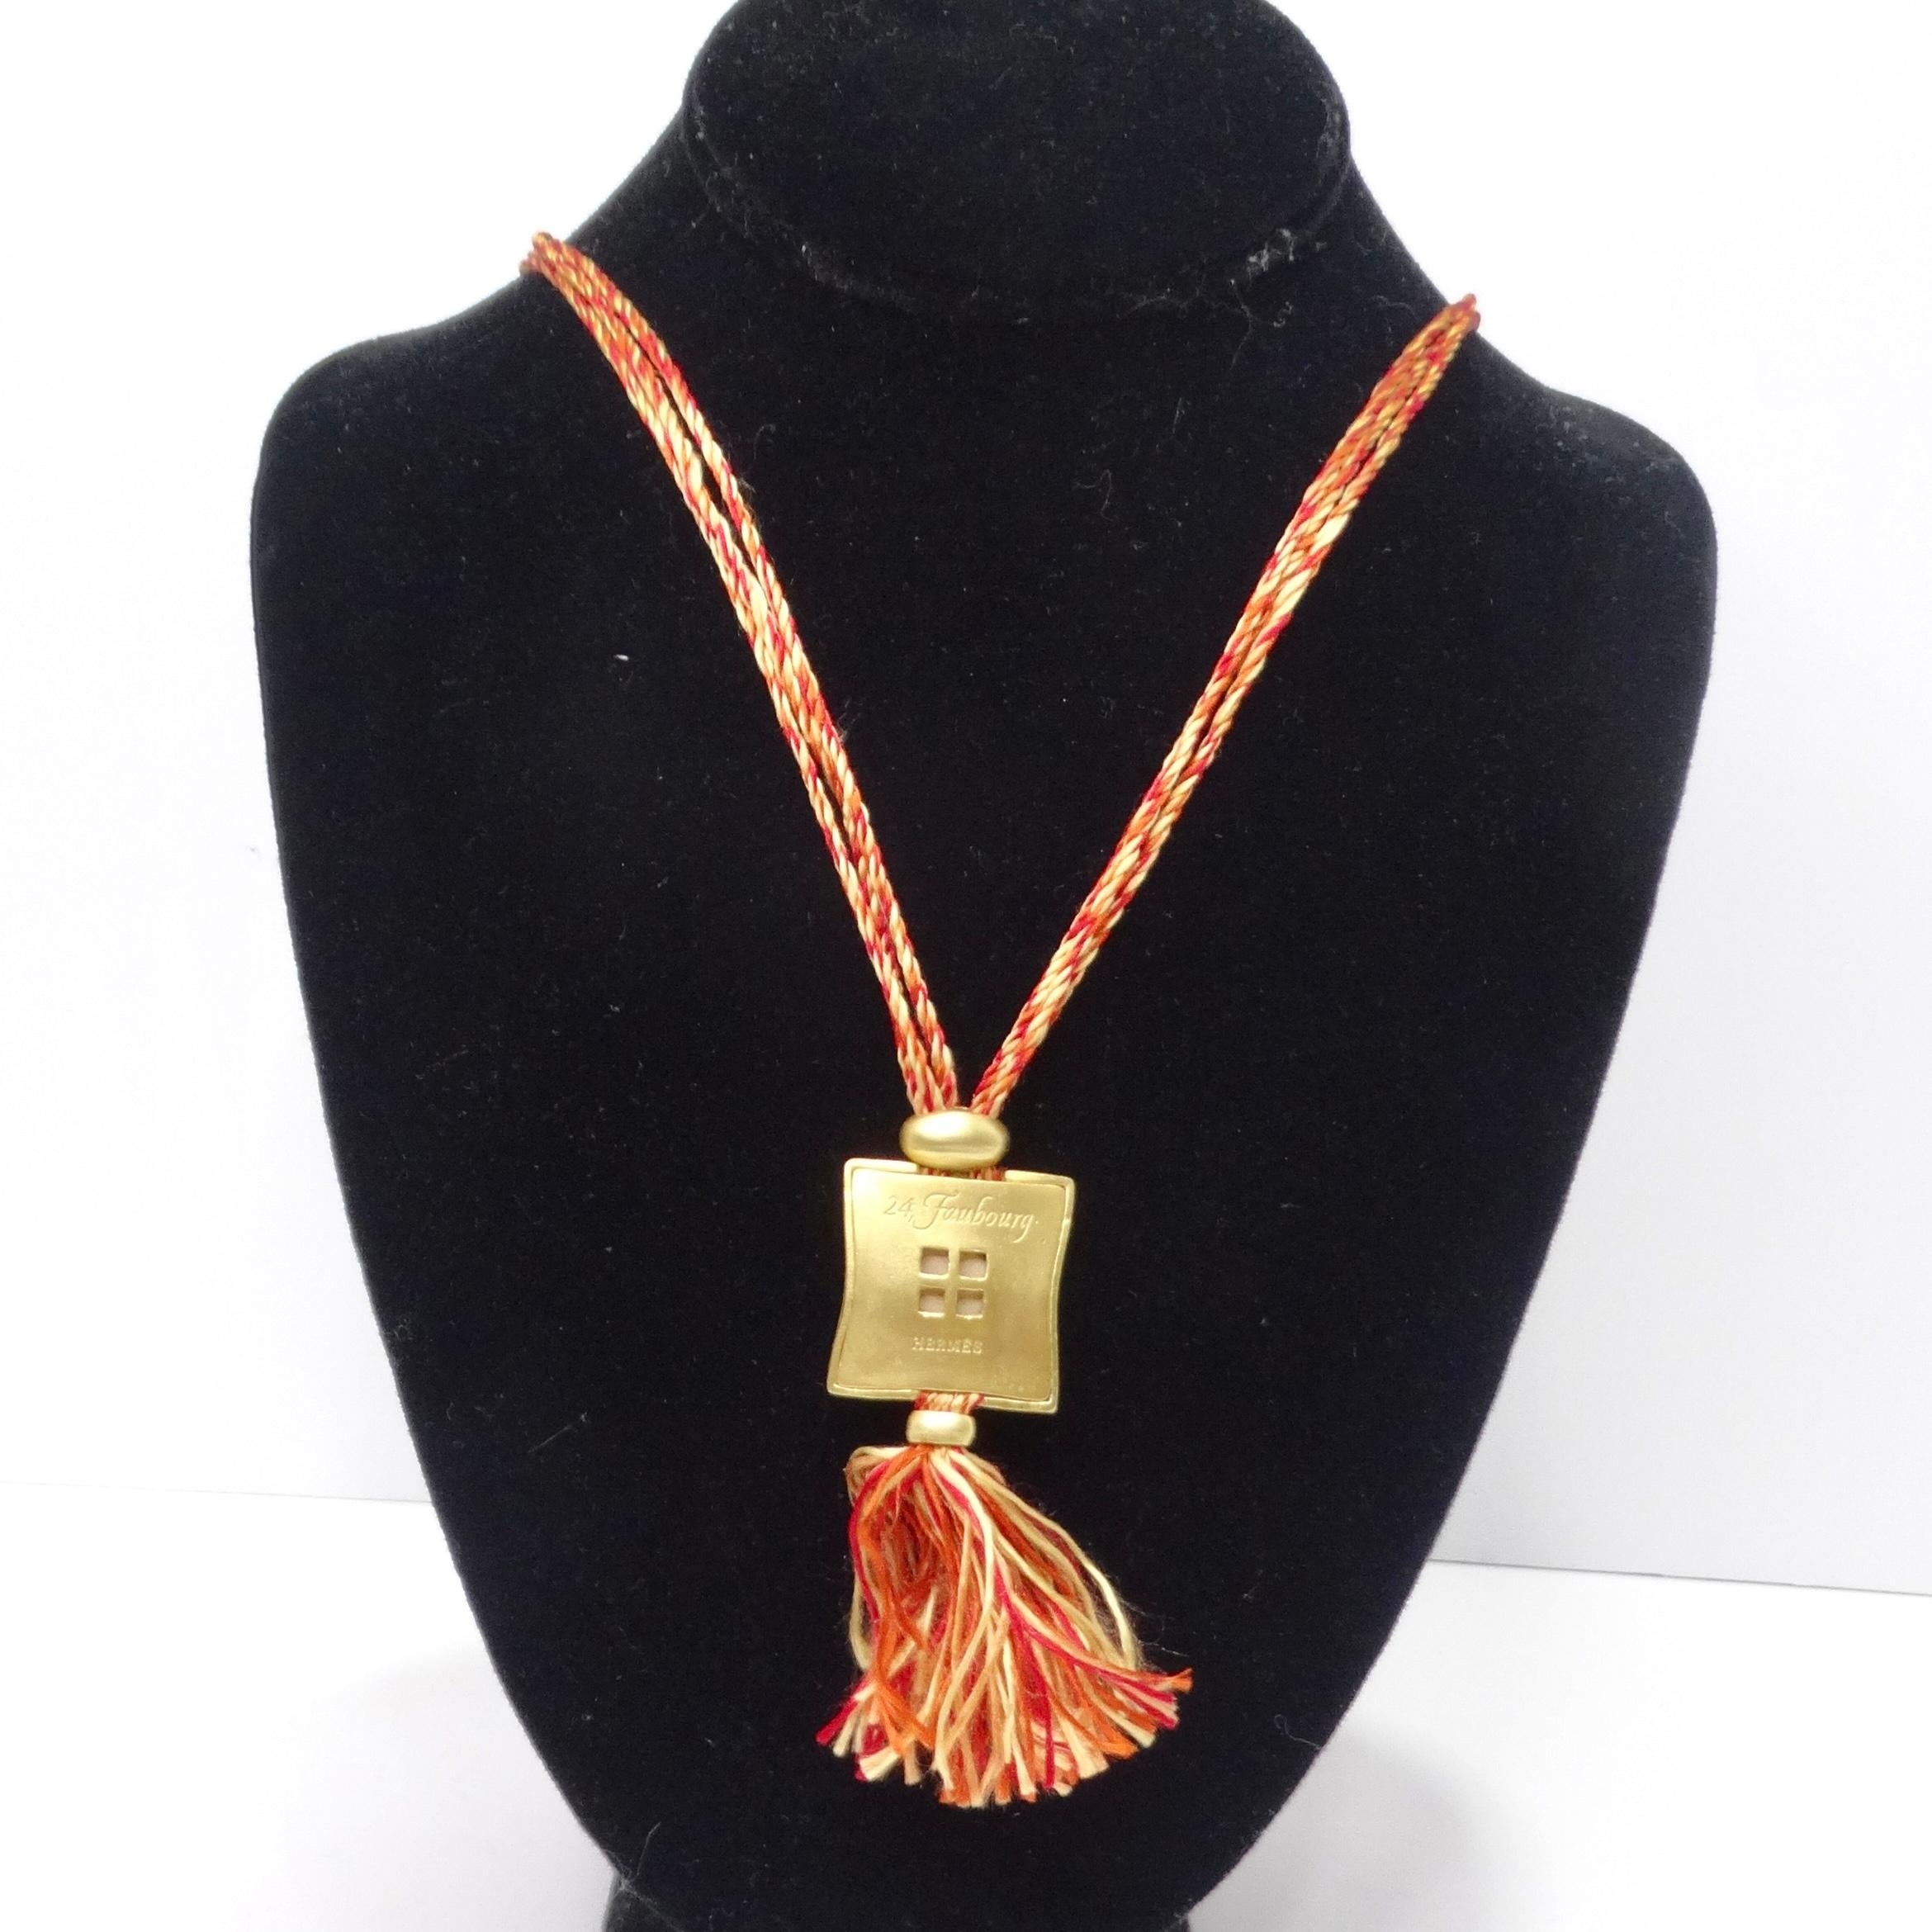 Step into the realm of luxury with the exquisite Hermes necklace, a masterpiece that epitomizes elegance and artistry. This captivating necklace boasts a gold tone square pendant adorned with the iconic Hermes logo on the front and a delicate floral